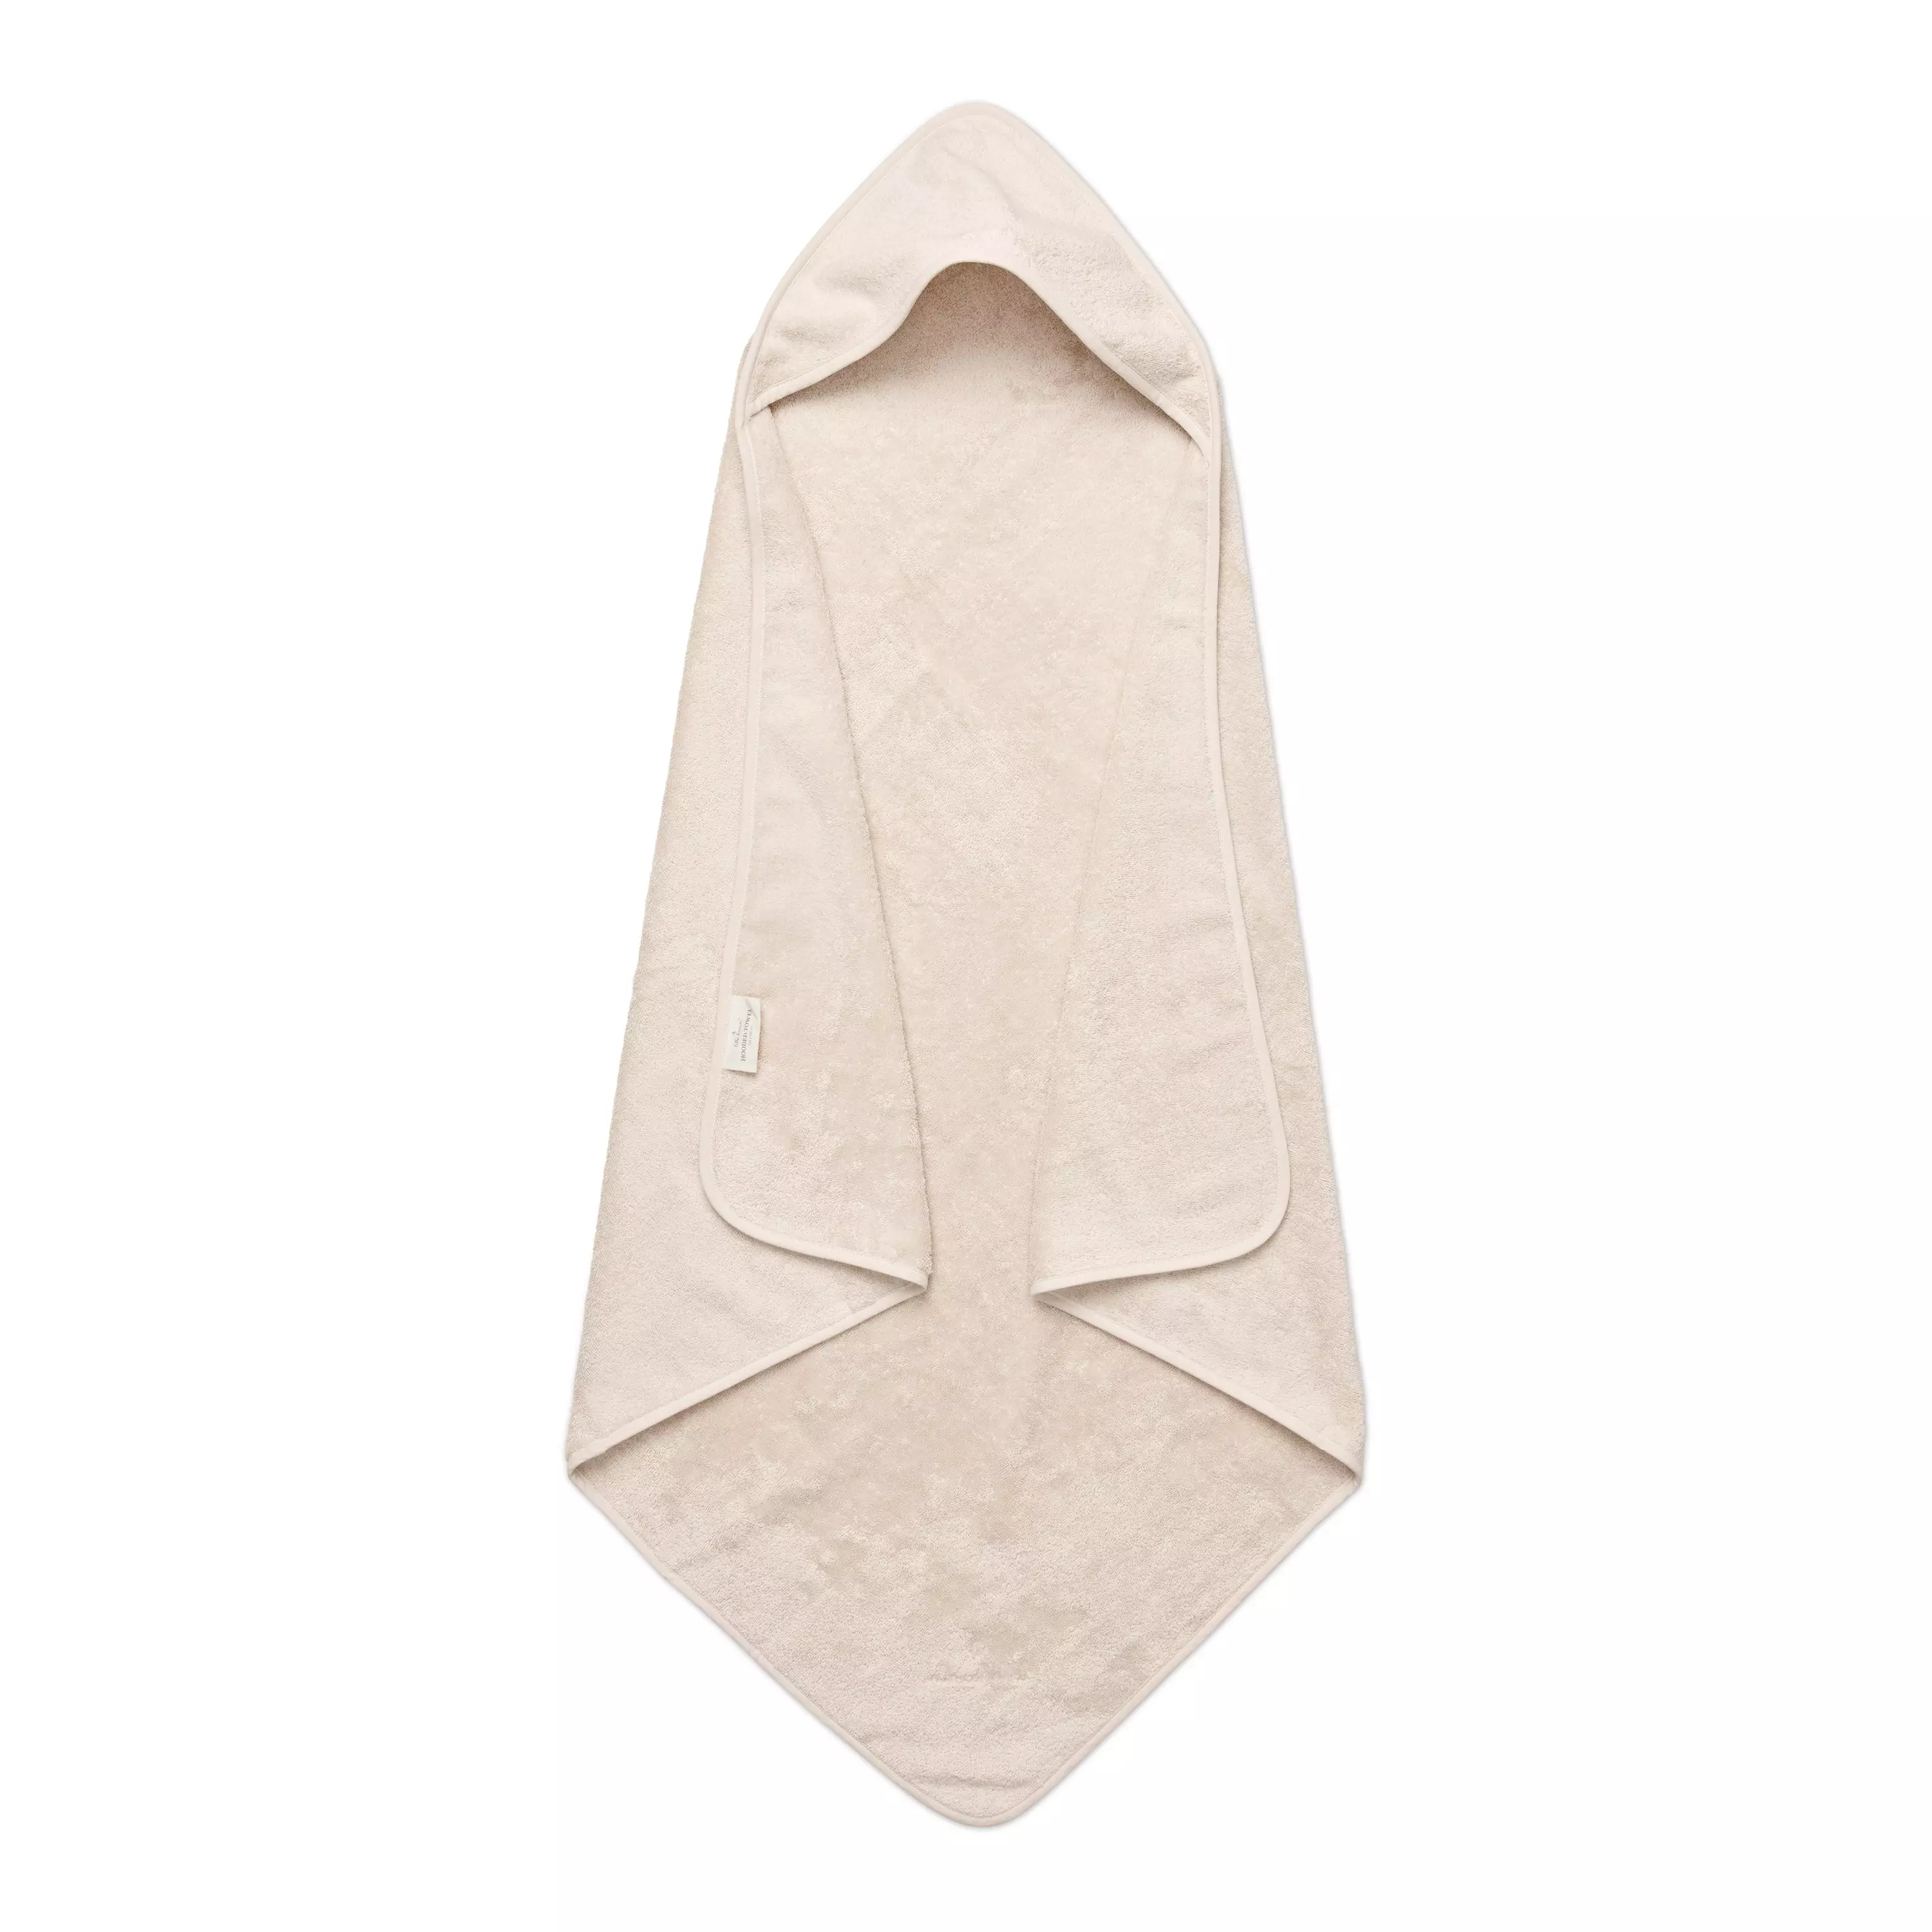 Lille Kanin Hooded Towel 100X100 Terry